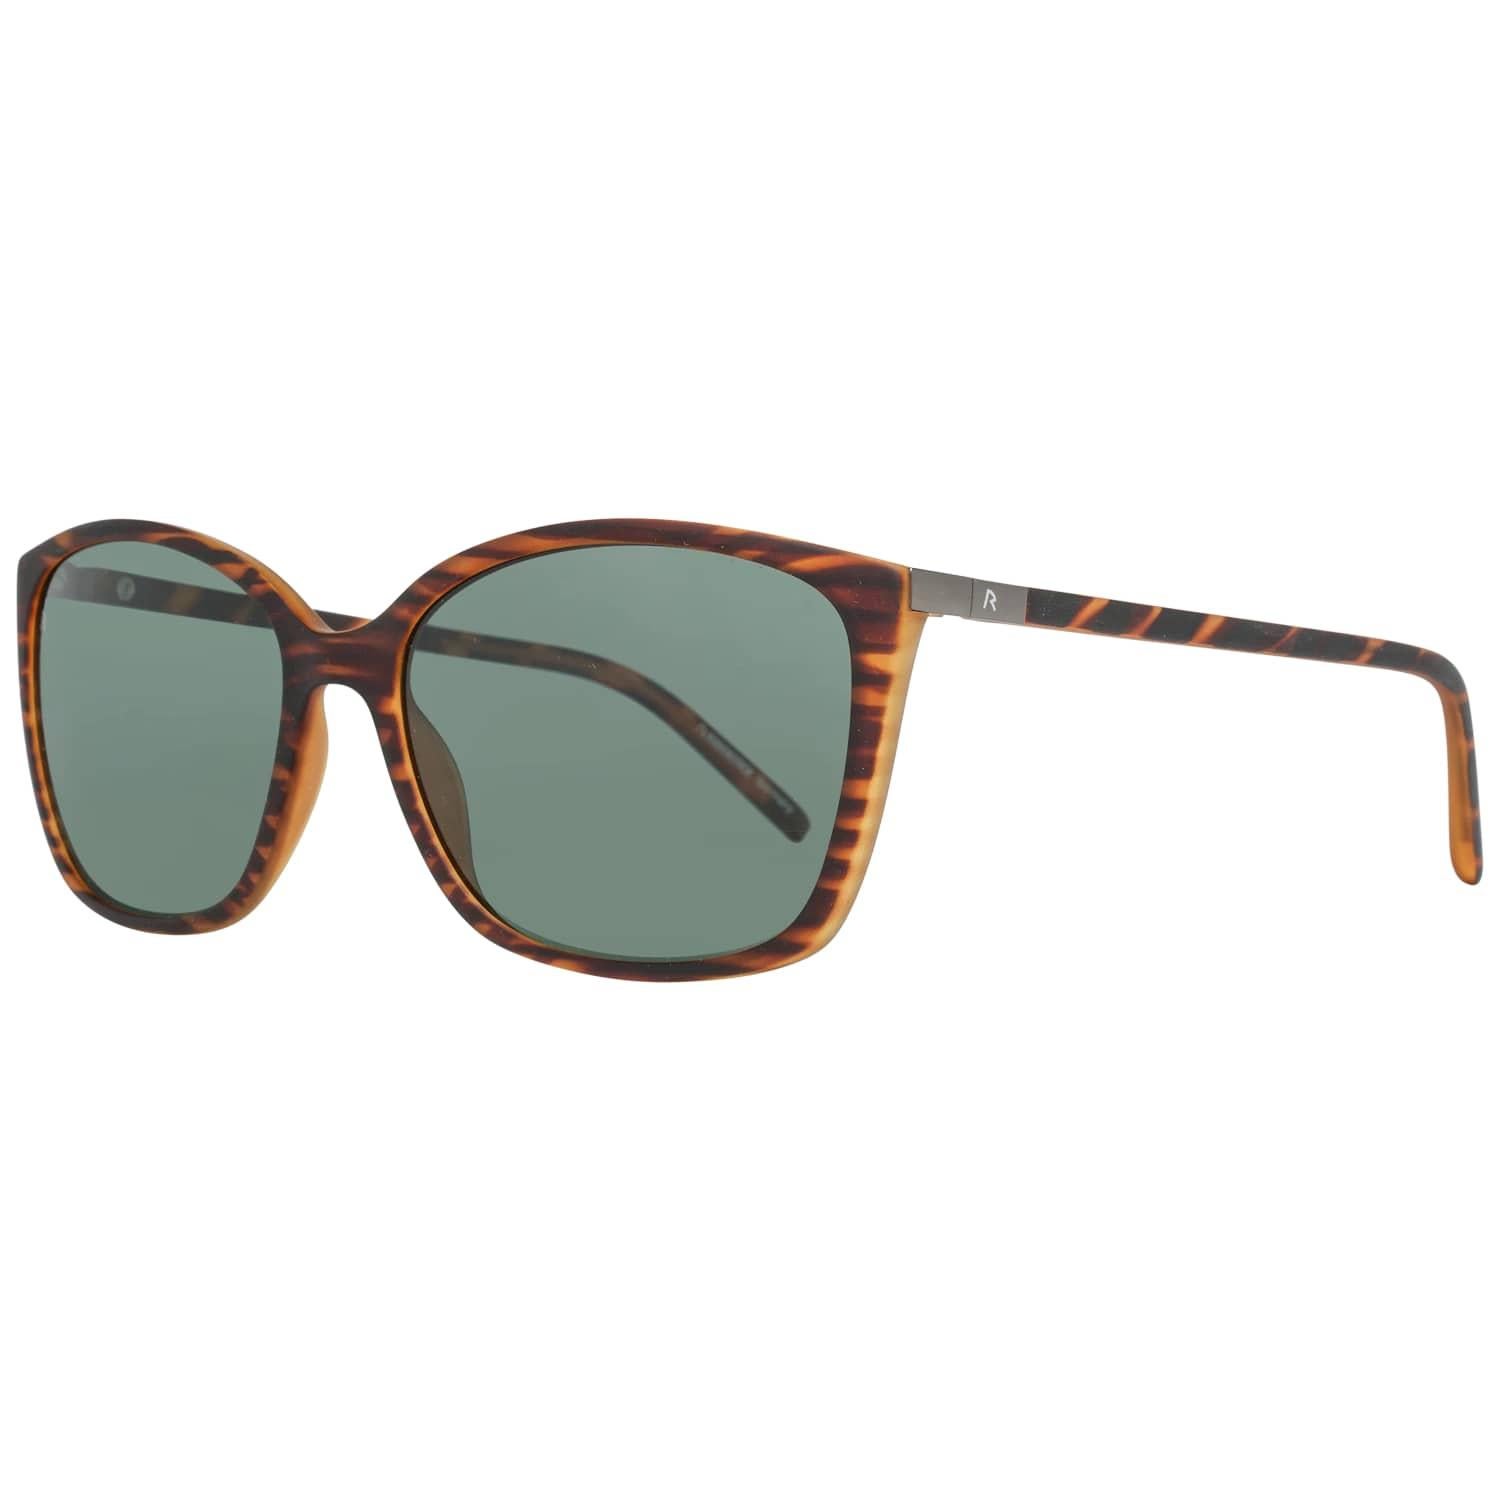 Details
MATERIAL: Acetate
COLOR: Brown
MODEL: R3291 A 57
GENDER: Women
COUNTRY OF MANUFACTURE: China
TYPE: Sunglasses
ORIGINAL CASE?: Yes
STYLE: Square
OCCASION: Casual
FEATURES: Lightweight
LENS COLOR: Green
LENS TECHNOLOGY: Polarized
YEAR